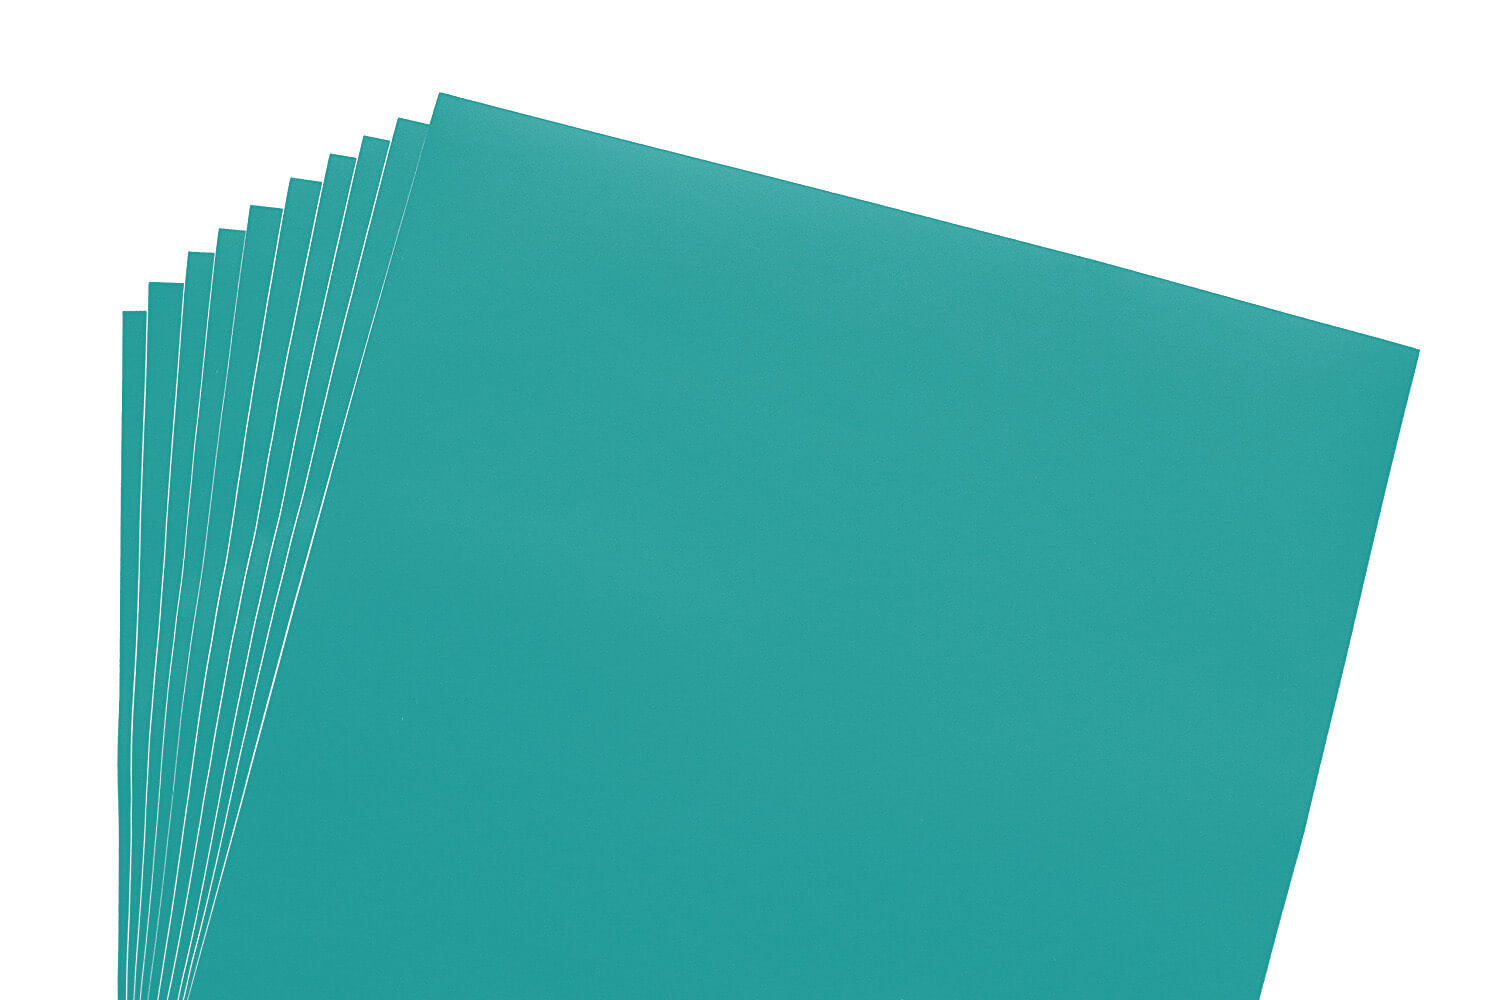 Permanent Outdoor Vinyl Sheets Teal Matte by Scraft Artise